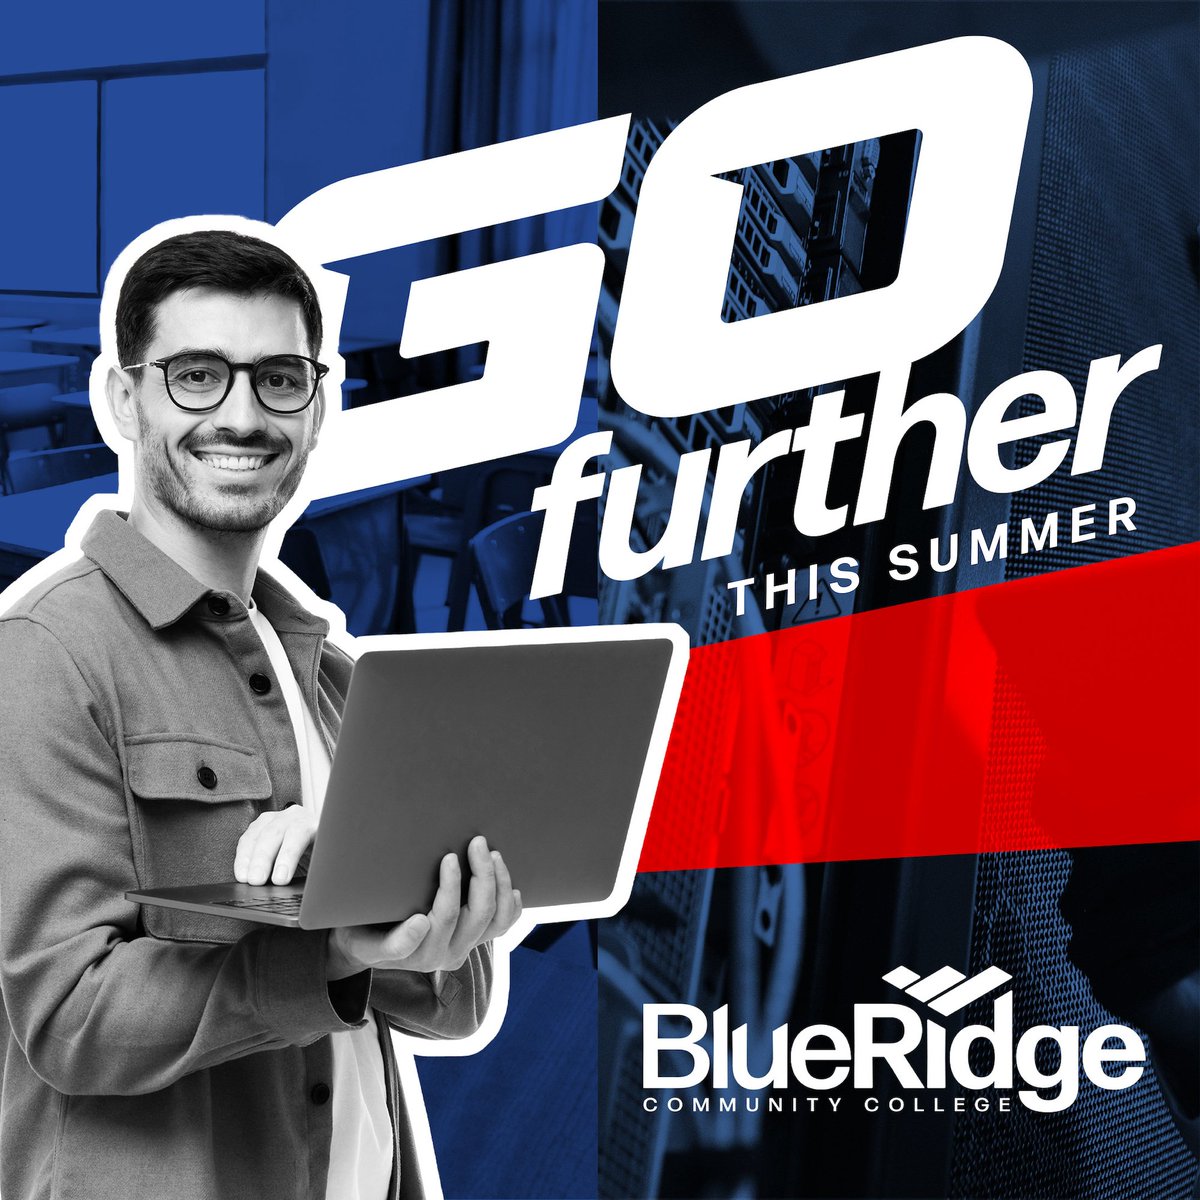 Ready for that next big step? Blue Ridge can help you go further in your career, education, and life goals! 😎 Apply for summer courses by May 9. Classes start May 20.

blueridge.edu/summer-courses
blueridge.edu/admissions

#EducationElevated #WNC #828isgreat #HigherEd #GoFurther